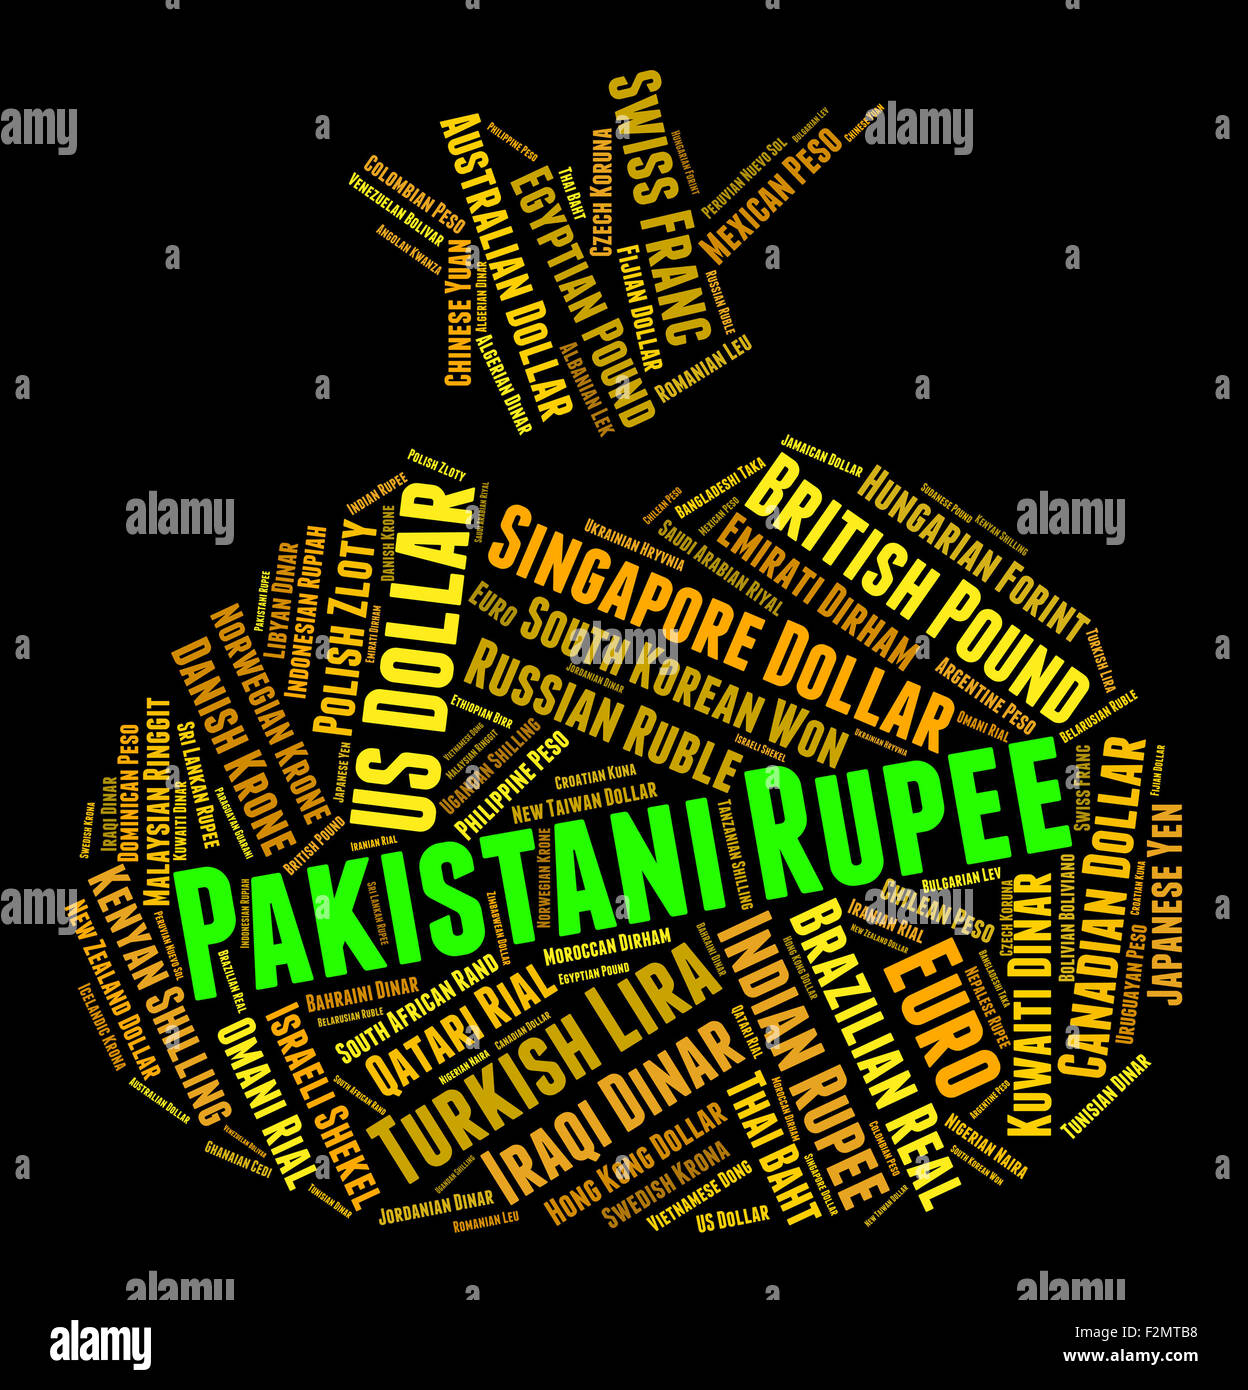 Pakistani Rupee Showing Currency Exchange And Rupees Stock Photo